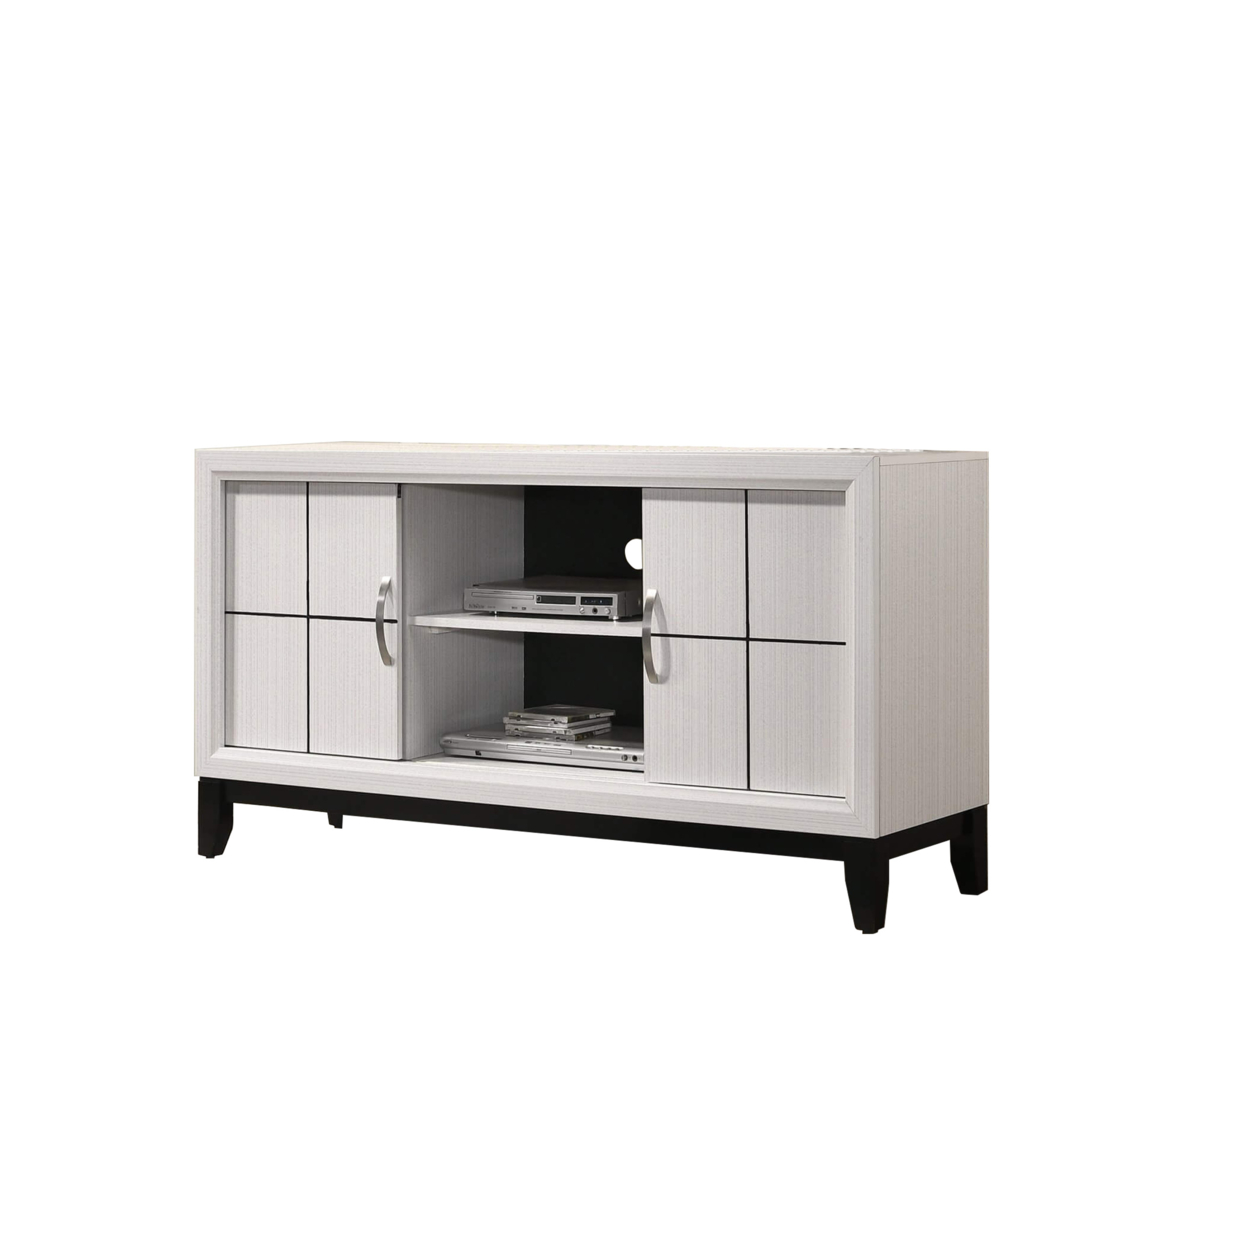 Wooden TV Stand With 2 Drawers And 2 Open Compartments, White And Black- Saltoro Sherpi